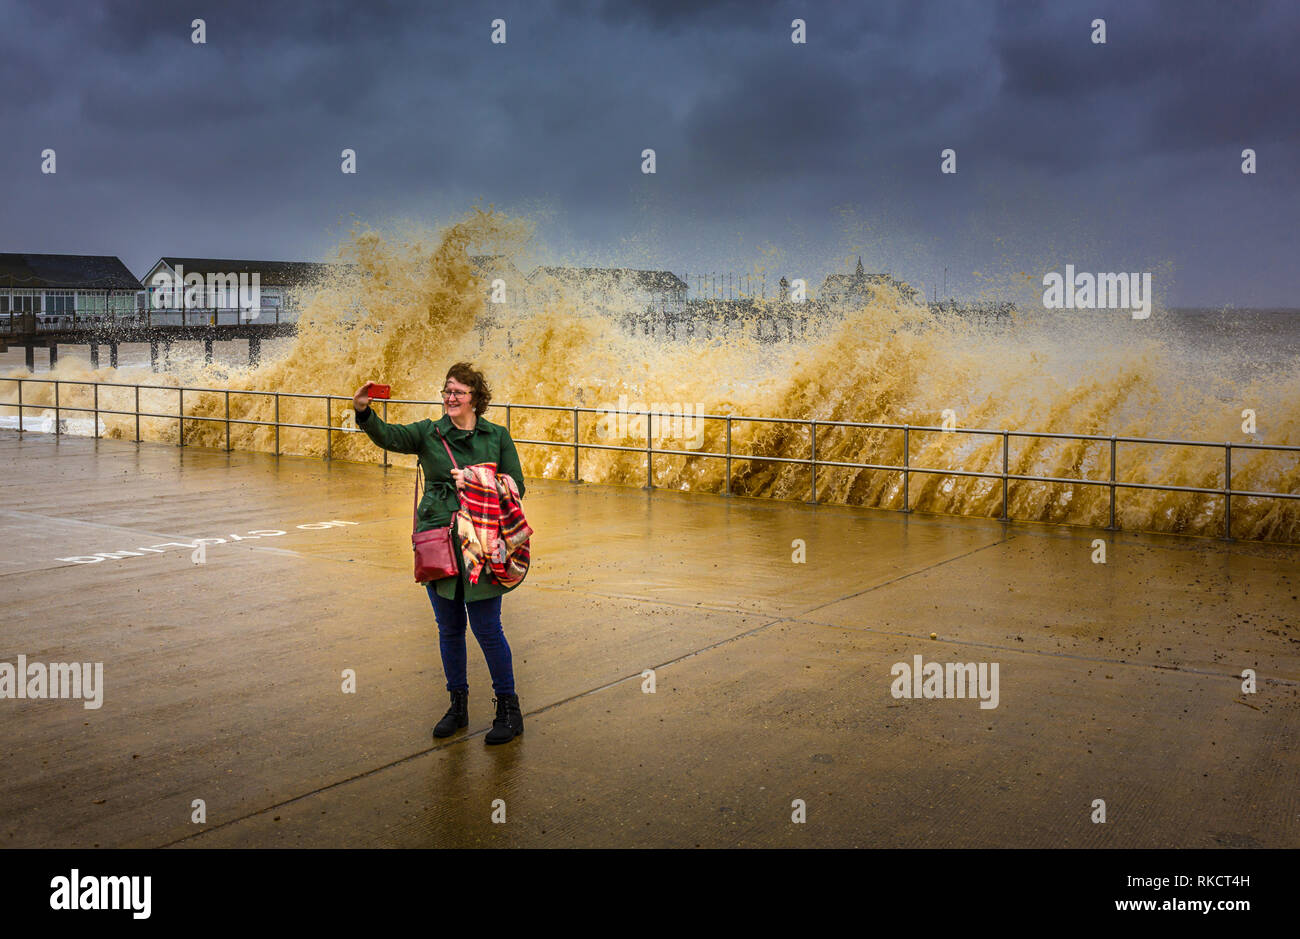 Southwold, Suffolk, UK. 30th April 2018. A lady takes a selfie in front of rough seas at Southwold pier. Southwold, Suffolk, UK. Stock Photo